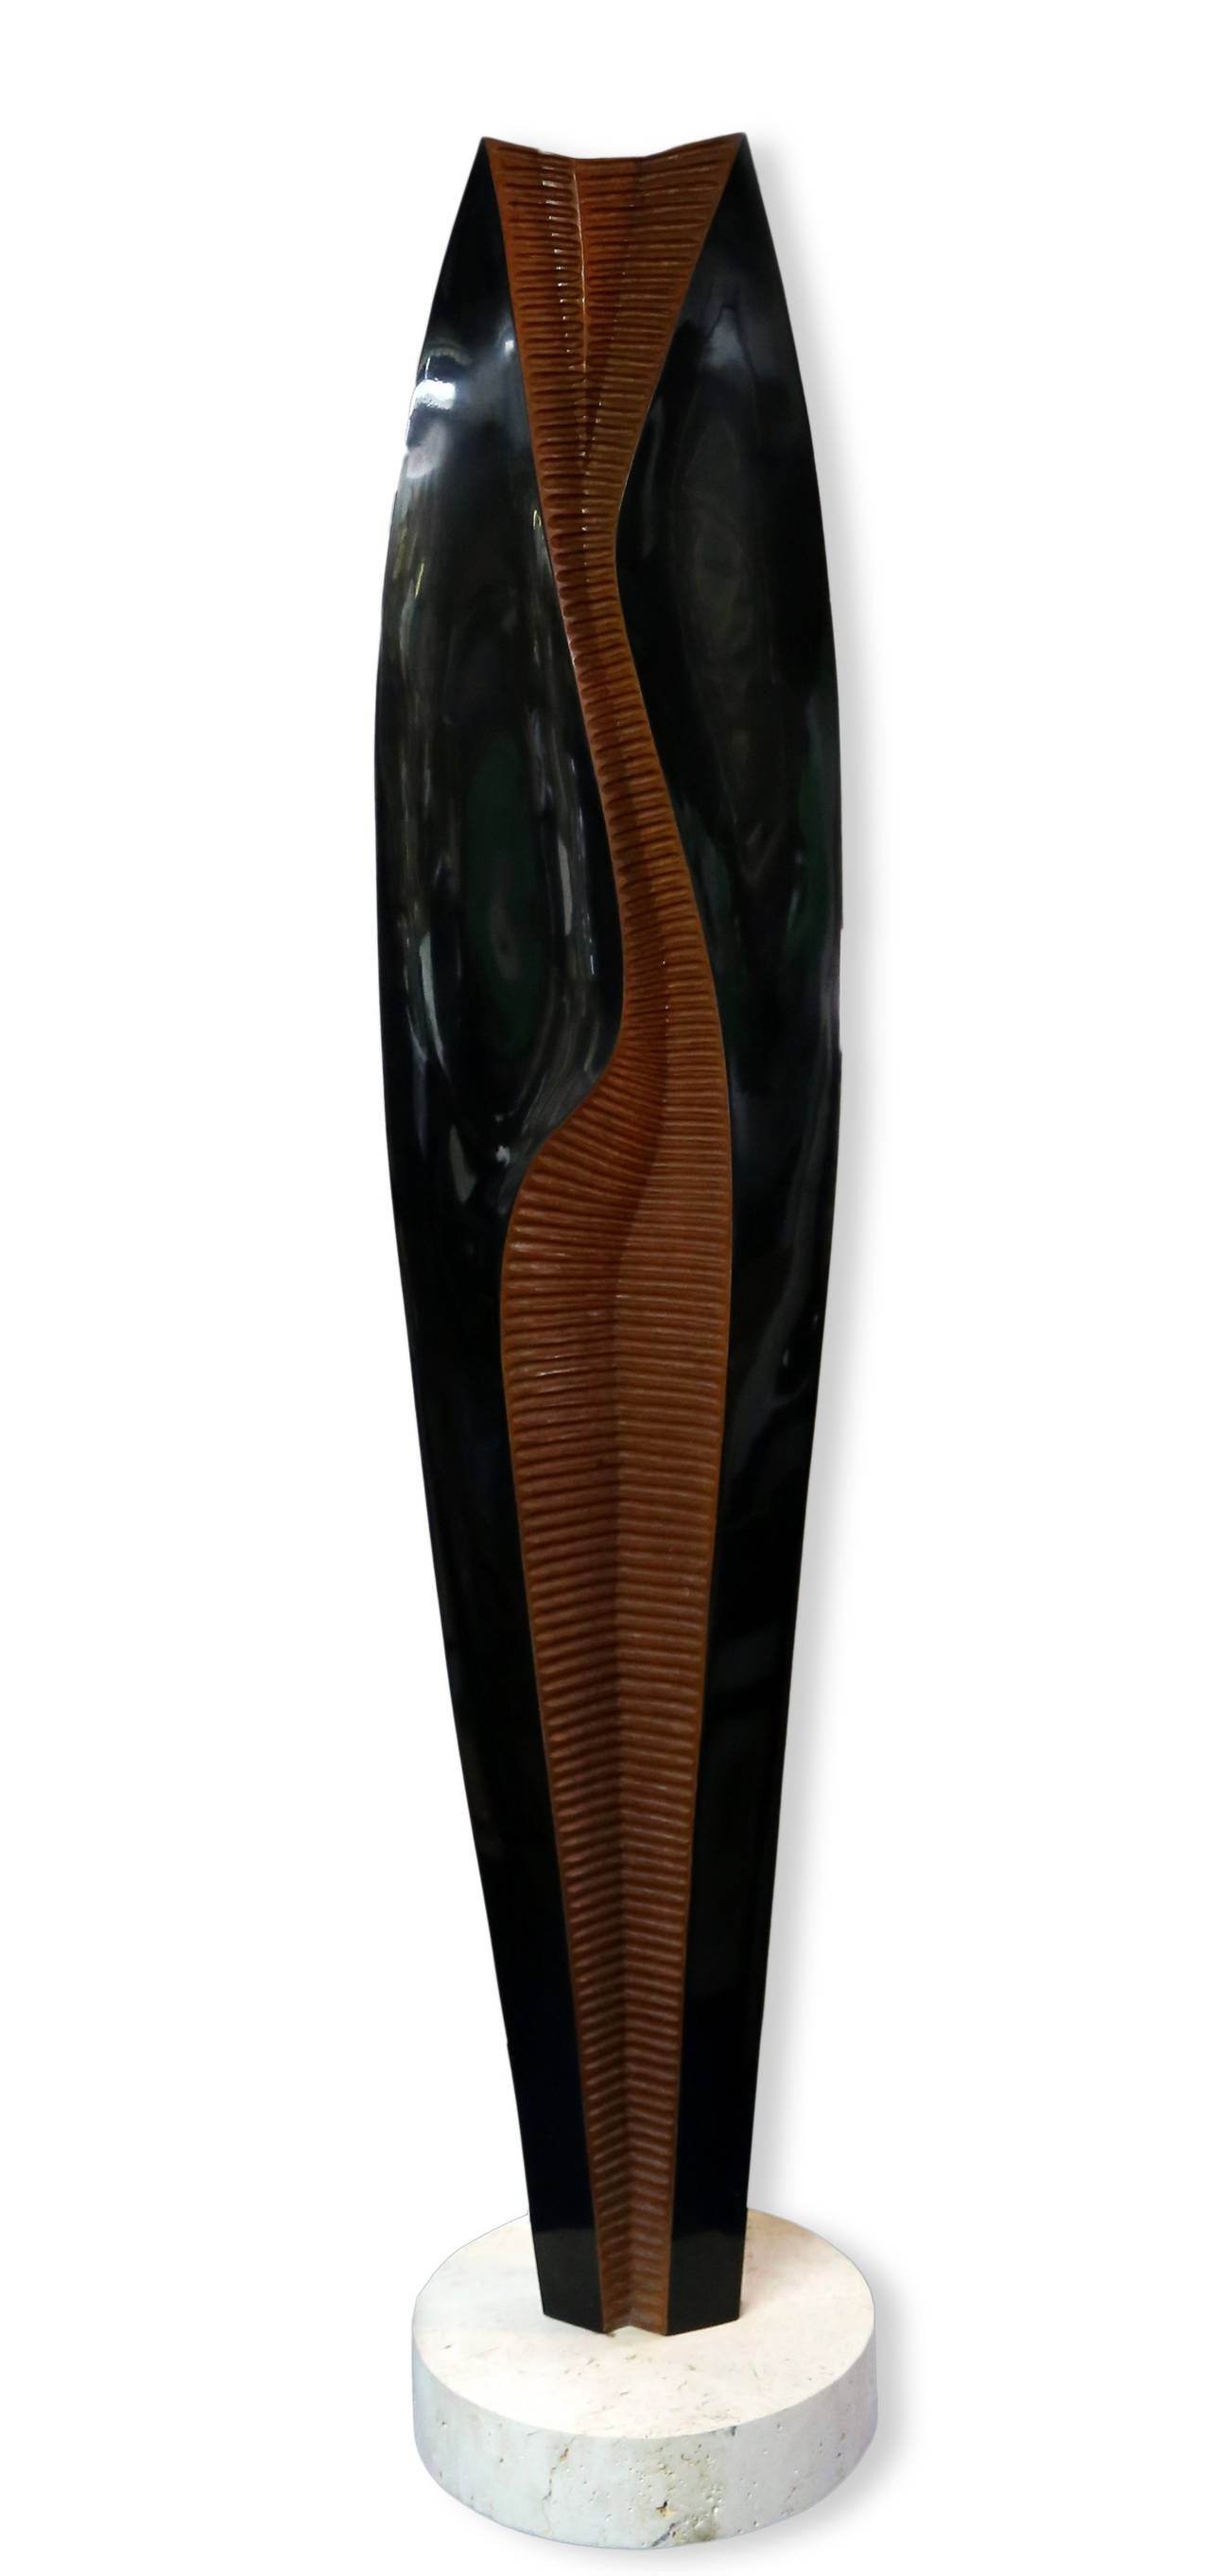 Abstract Female Figure, Large Standing Sculpture by Henri Moretti - Black Abstract Sculpture by Henry Moretti